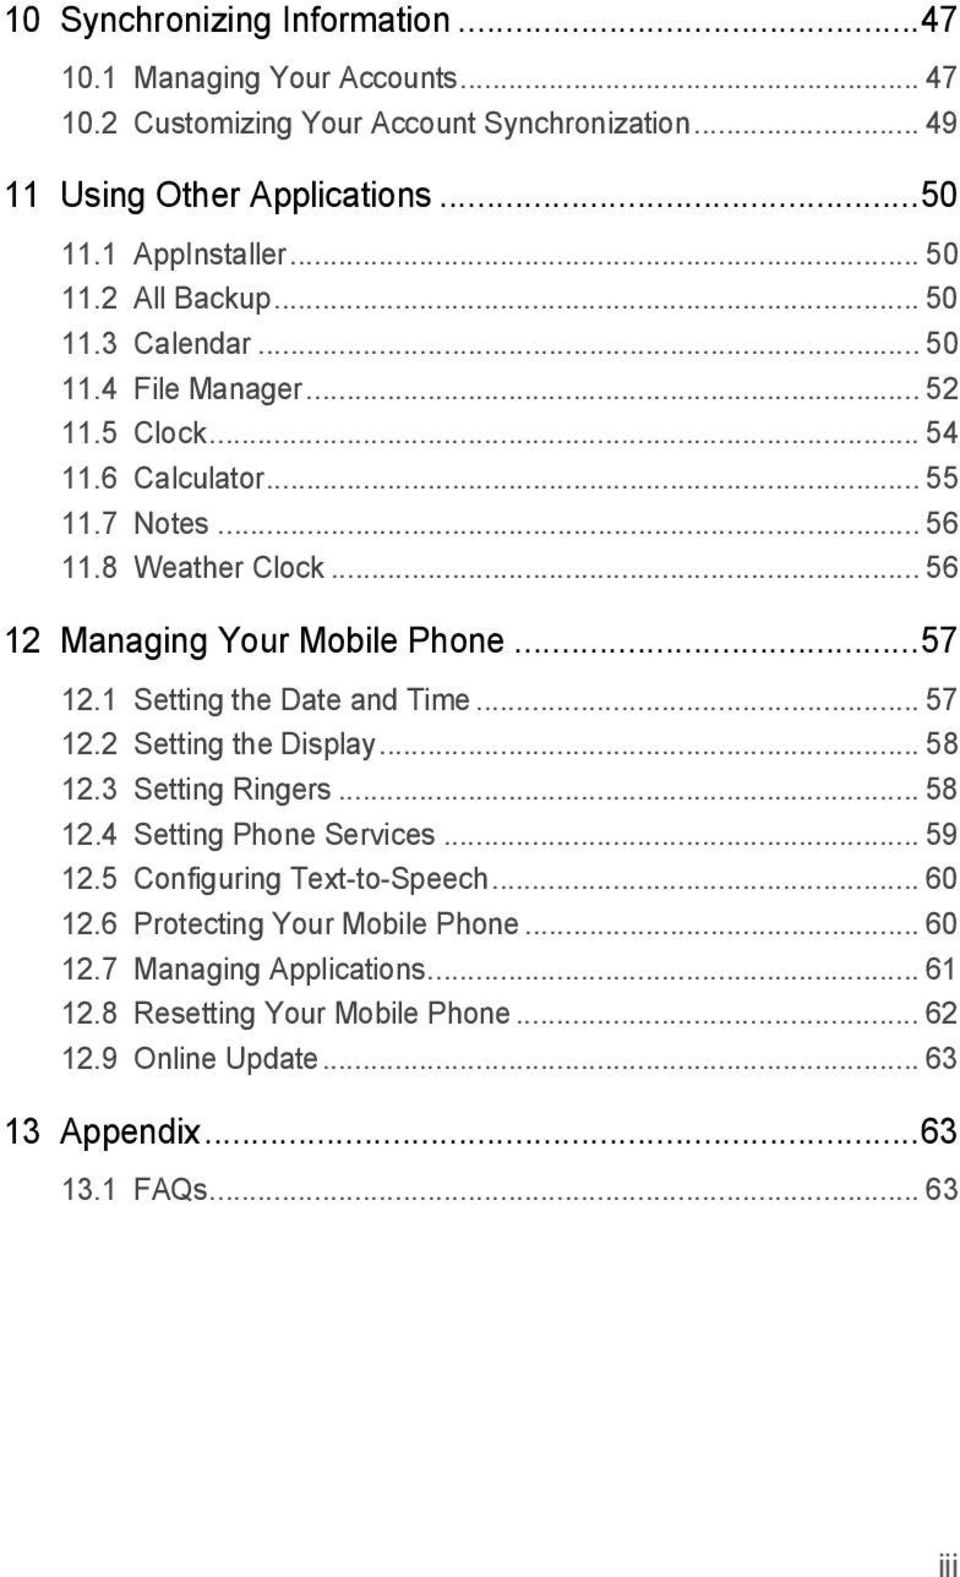 .. 56 12 Managing Your Mobile Phone...57 12.1 Setting the Date and Time... 57 12.2 Setting the Display... 58 12.3 Setting Ringers... 58 12.4 Setting Phone Services... 59 12.